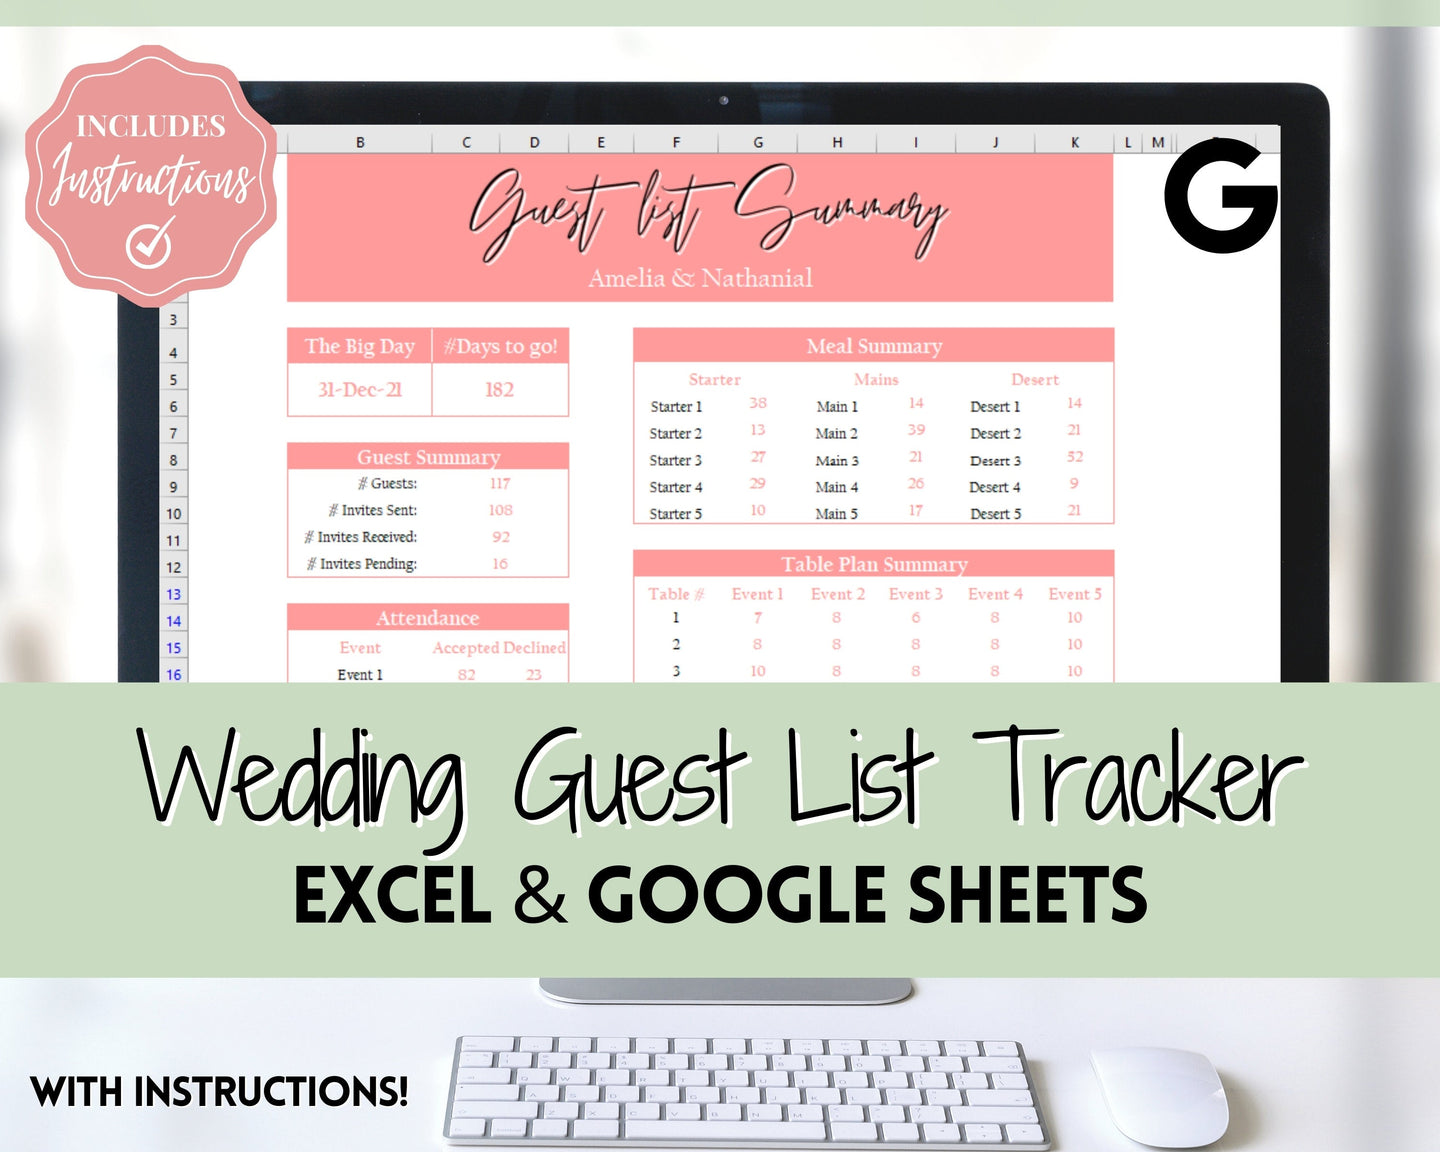 Wedding Guest List Planner Spreadsheet! Guest List Tracker, Google Sheets & Excel, Guest RSVP, Dietary Meal Planner, Table Plan, Gift, Event